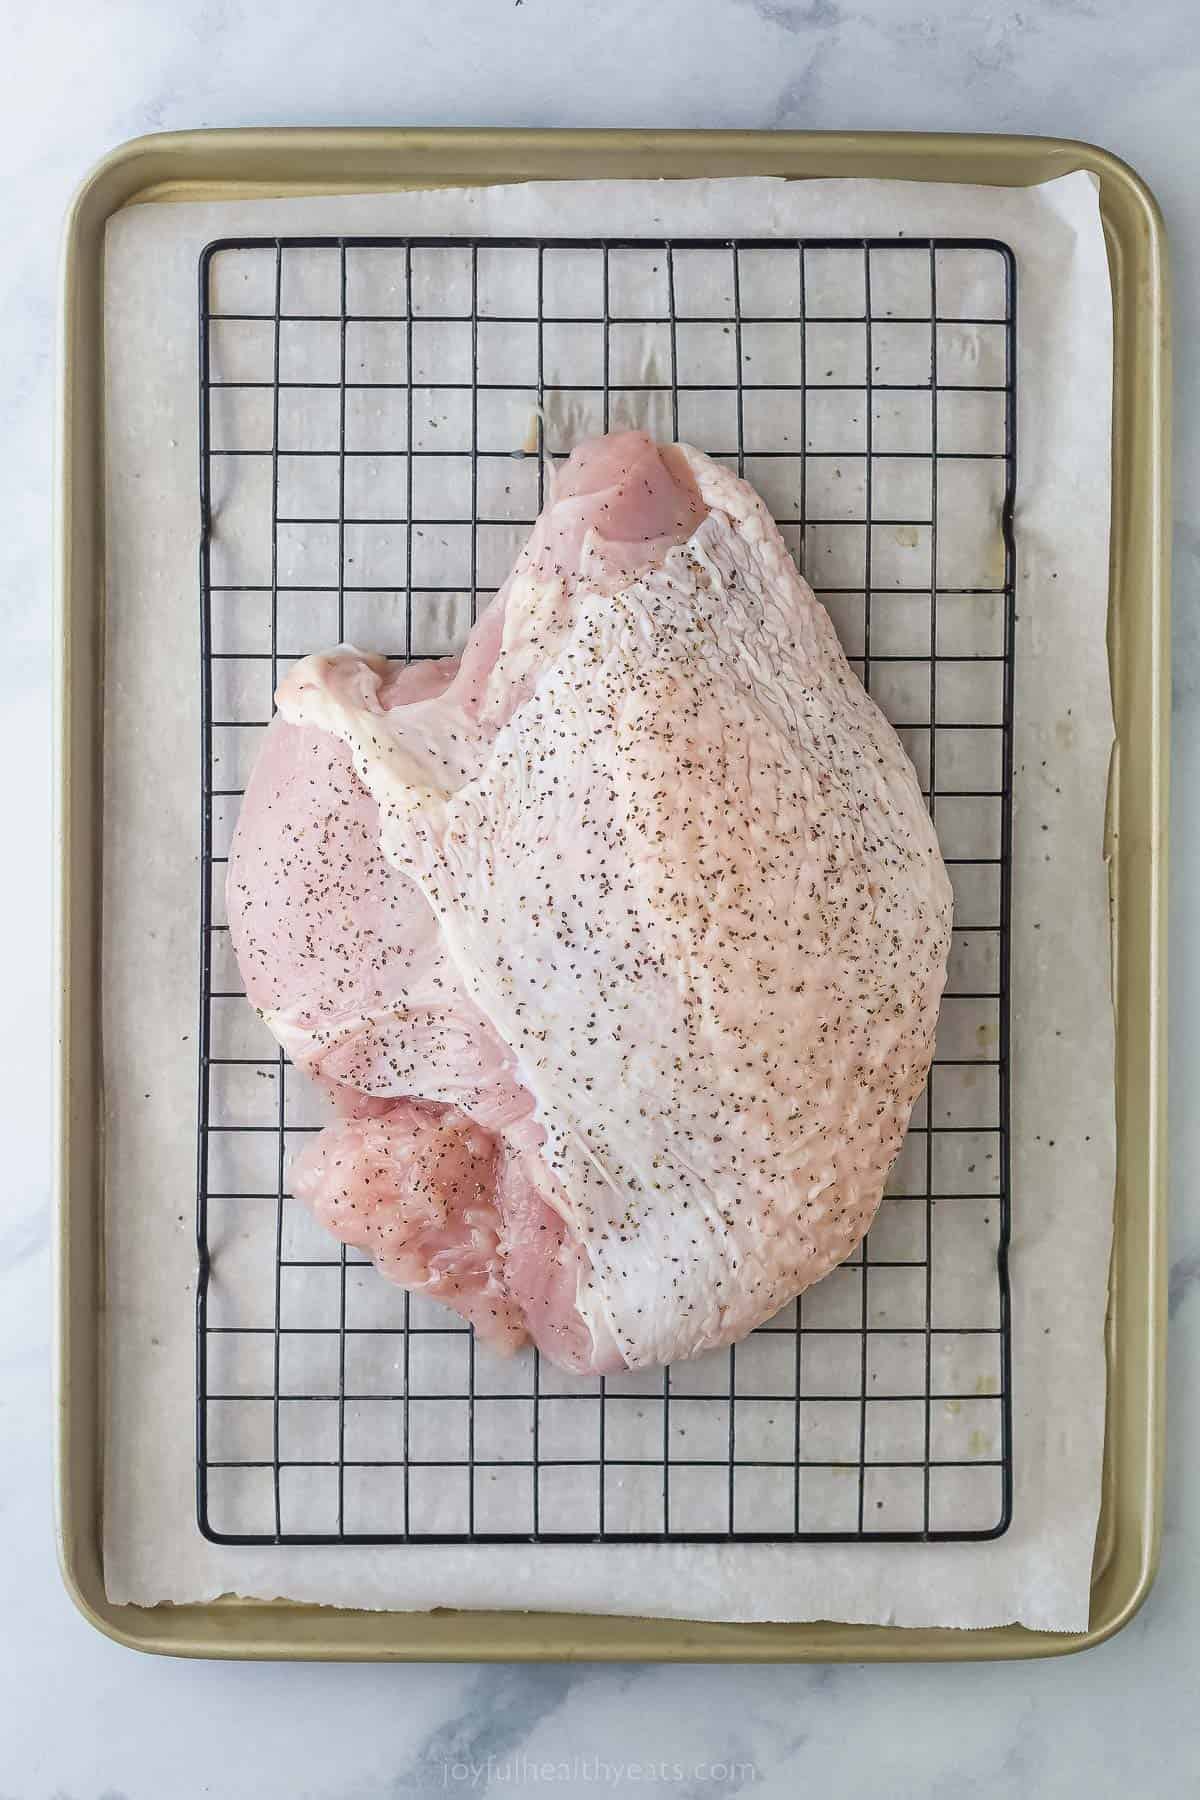 a raw turkey breast on a baking rack seasoned with salt and pepper